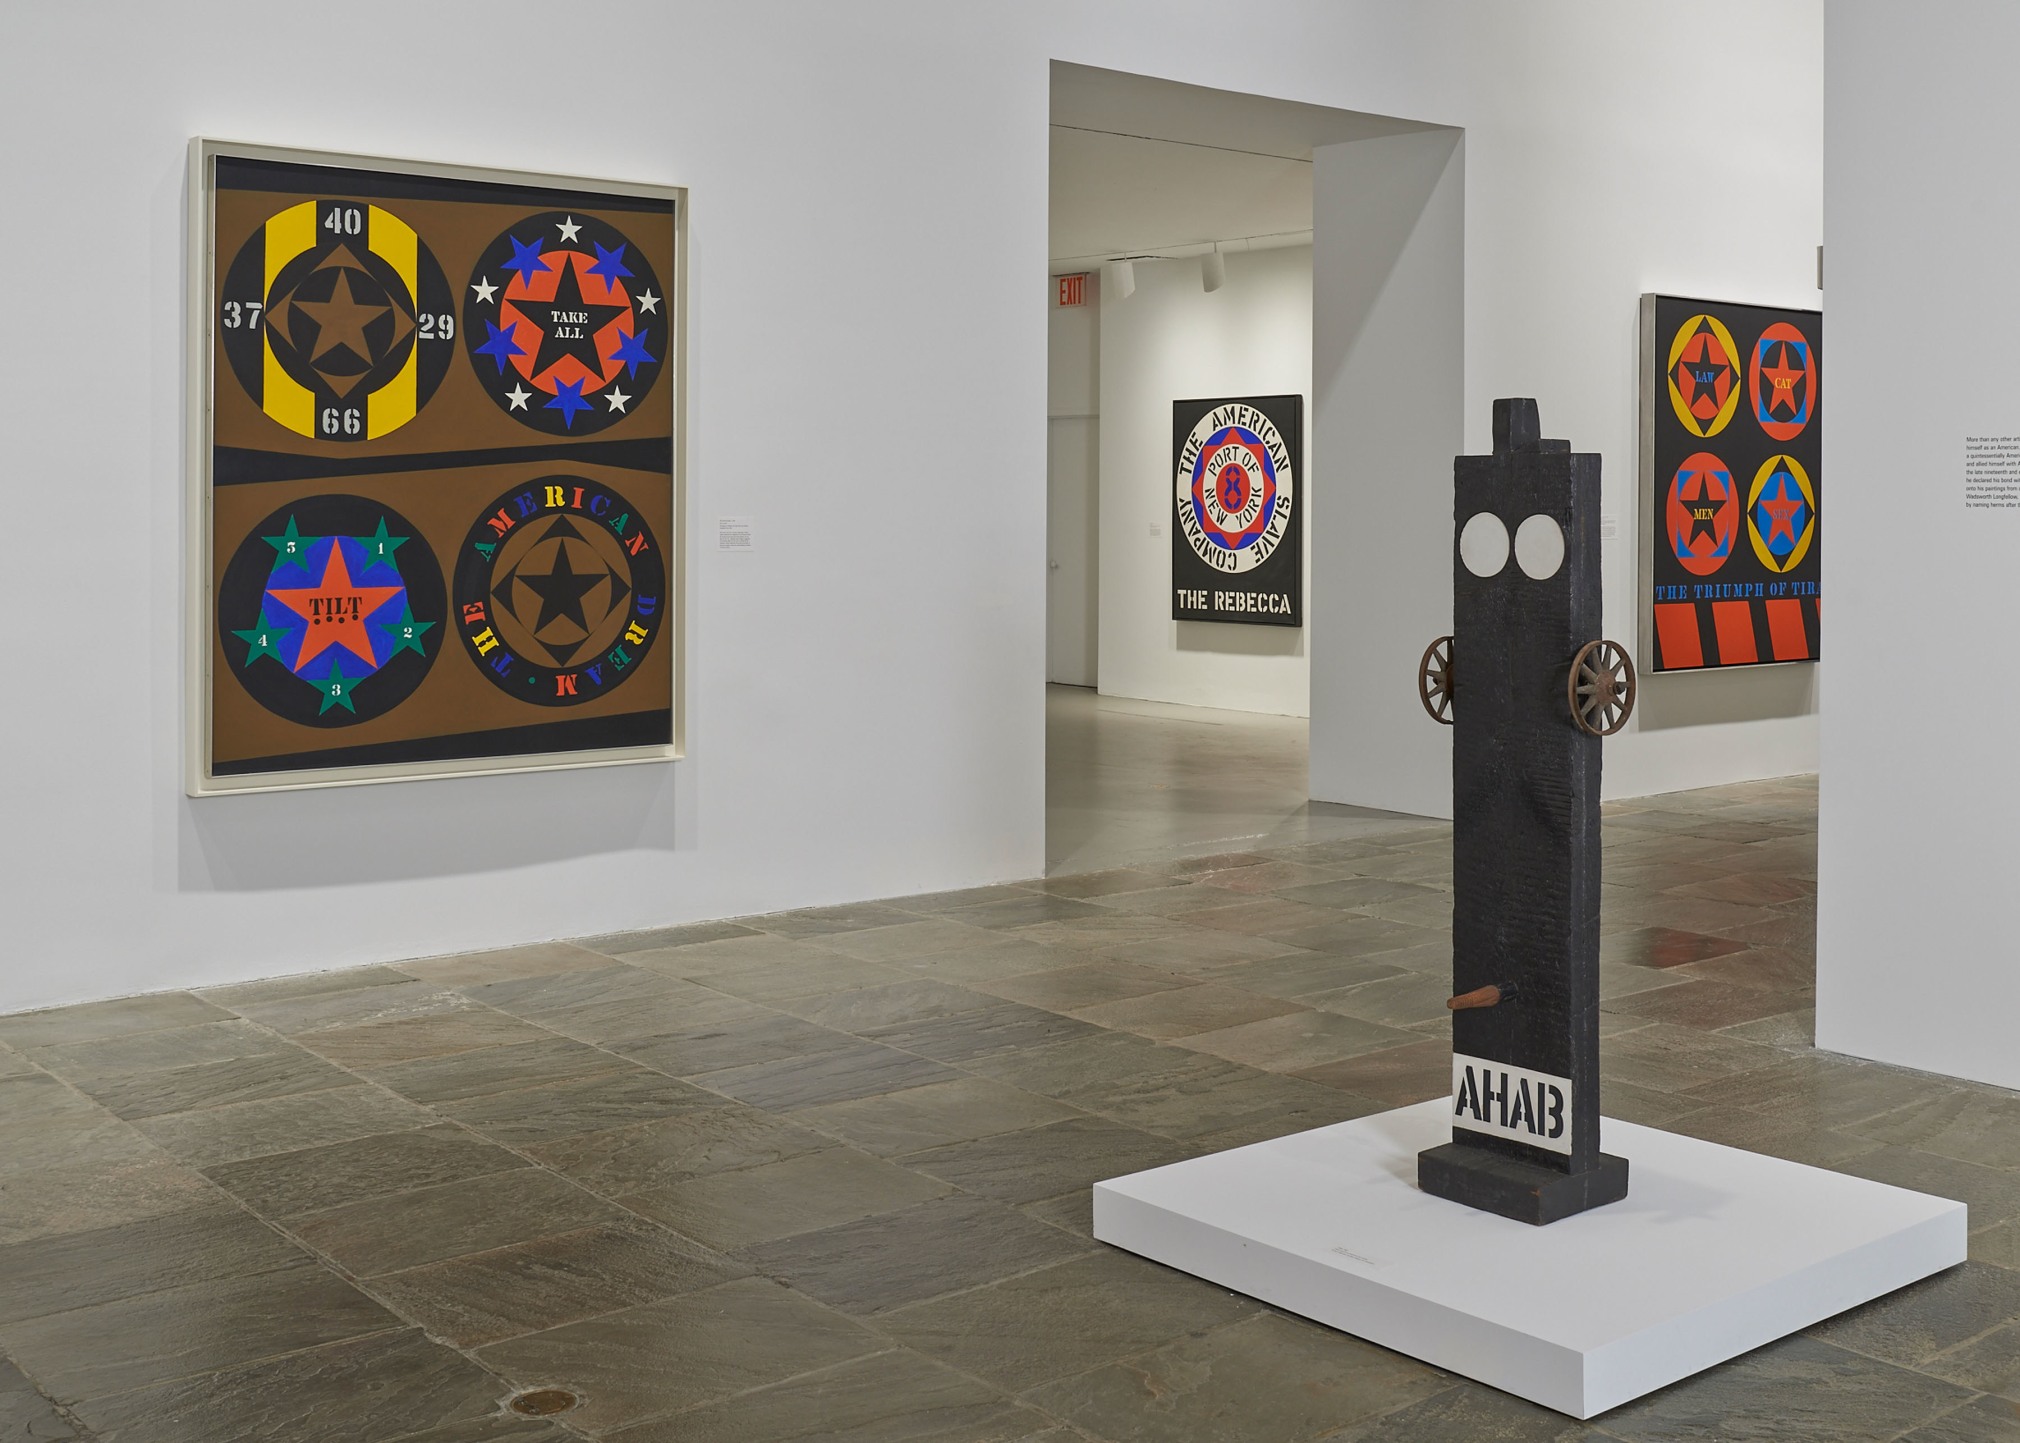 Installation view of Robert Indiana: Beyond LOVE, Whitney Museum of American Art, New York, September 26, 2013&ndash;January 5, 2014. Left to right, The American Dream, I (1960&ndash;61), The Rebecca (1962), Ahab (1960&ndash;62), and The Triumph of Tira (1960&ndash;62), &nbsp;